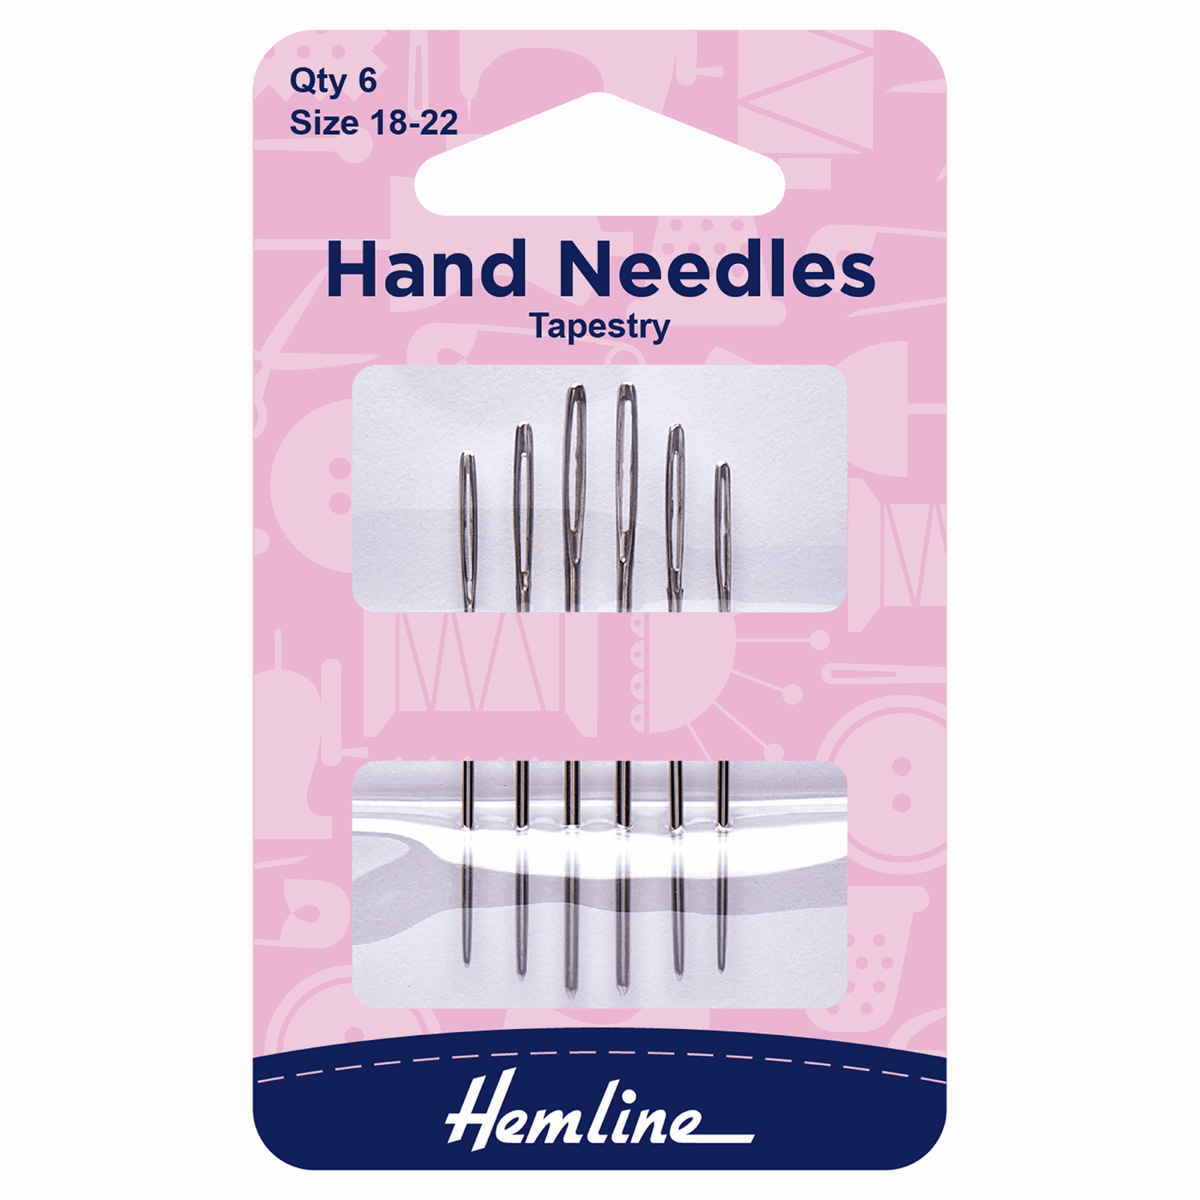 Hemline Hand Sewing Needles: Tapestry: Size 18-22